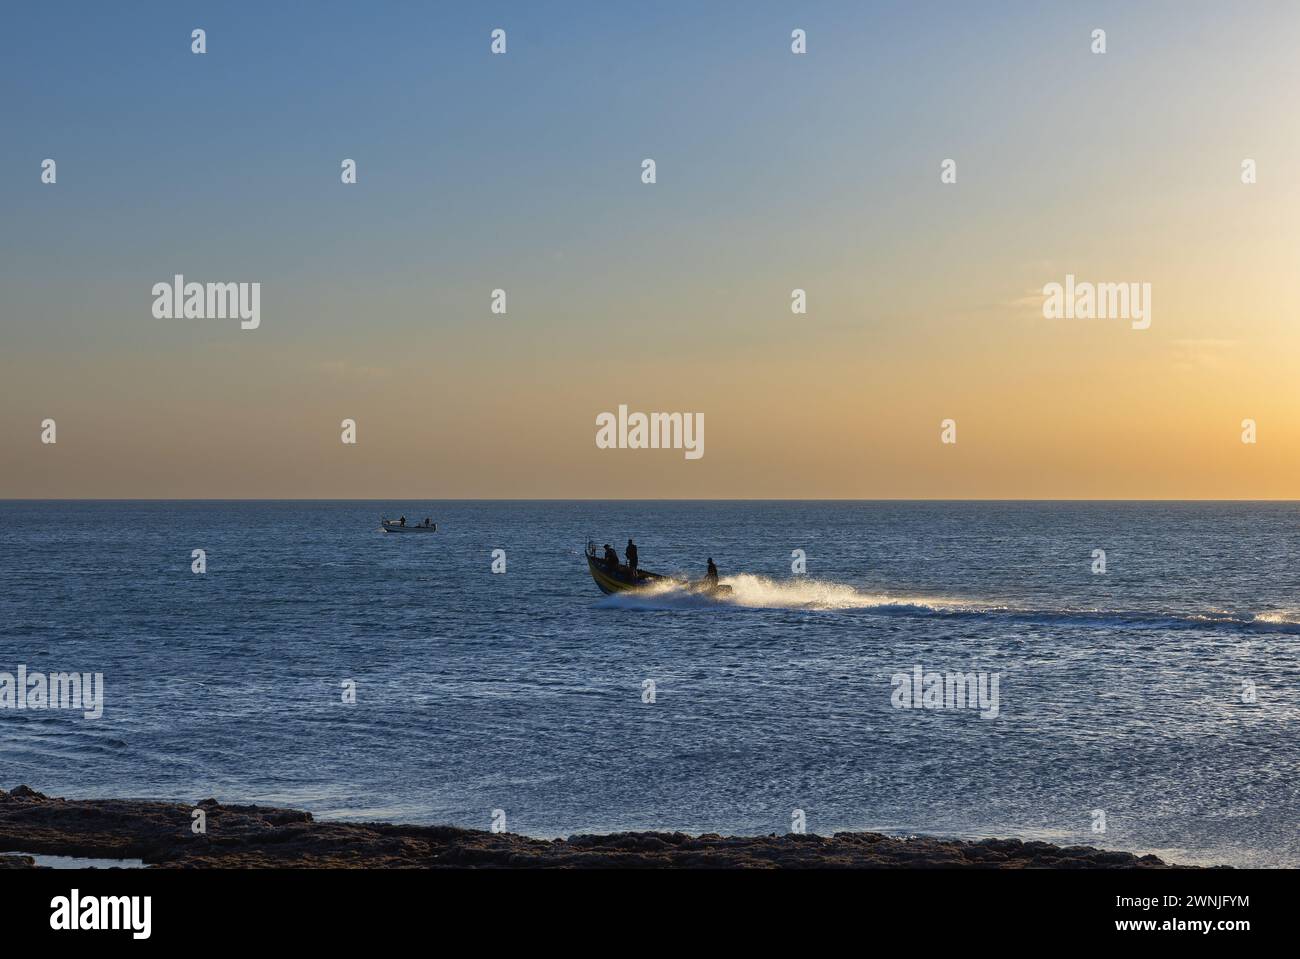 Fishermen on boats in the Mediterranean sea at sunset Israel Stock Photo